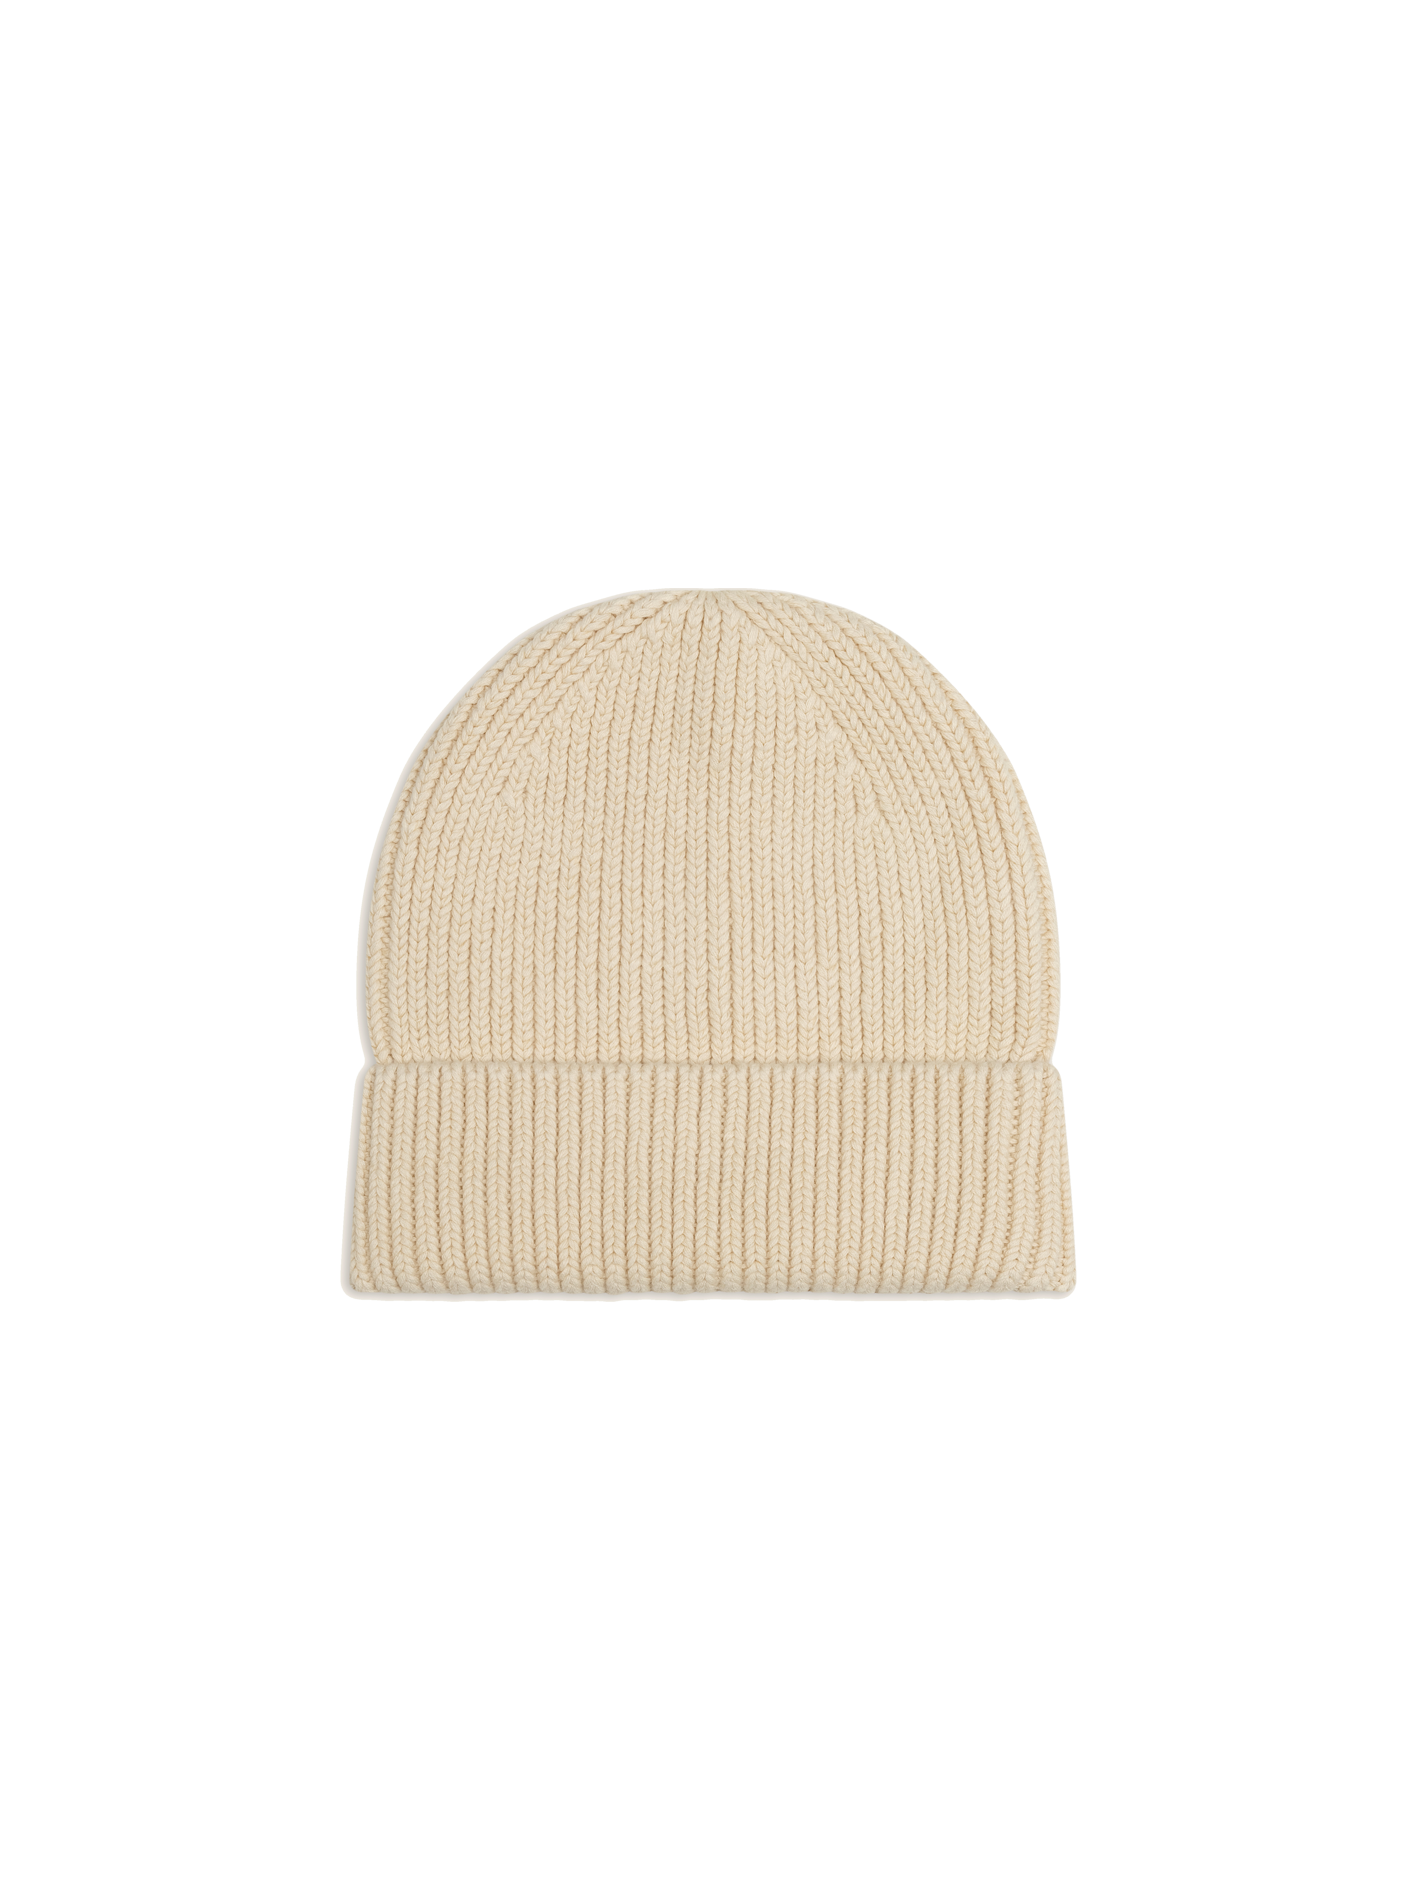 Illoura the Label - Knit Beanie - Biscuit